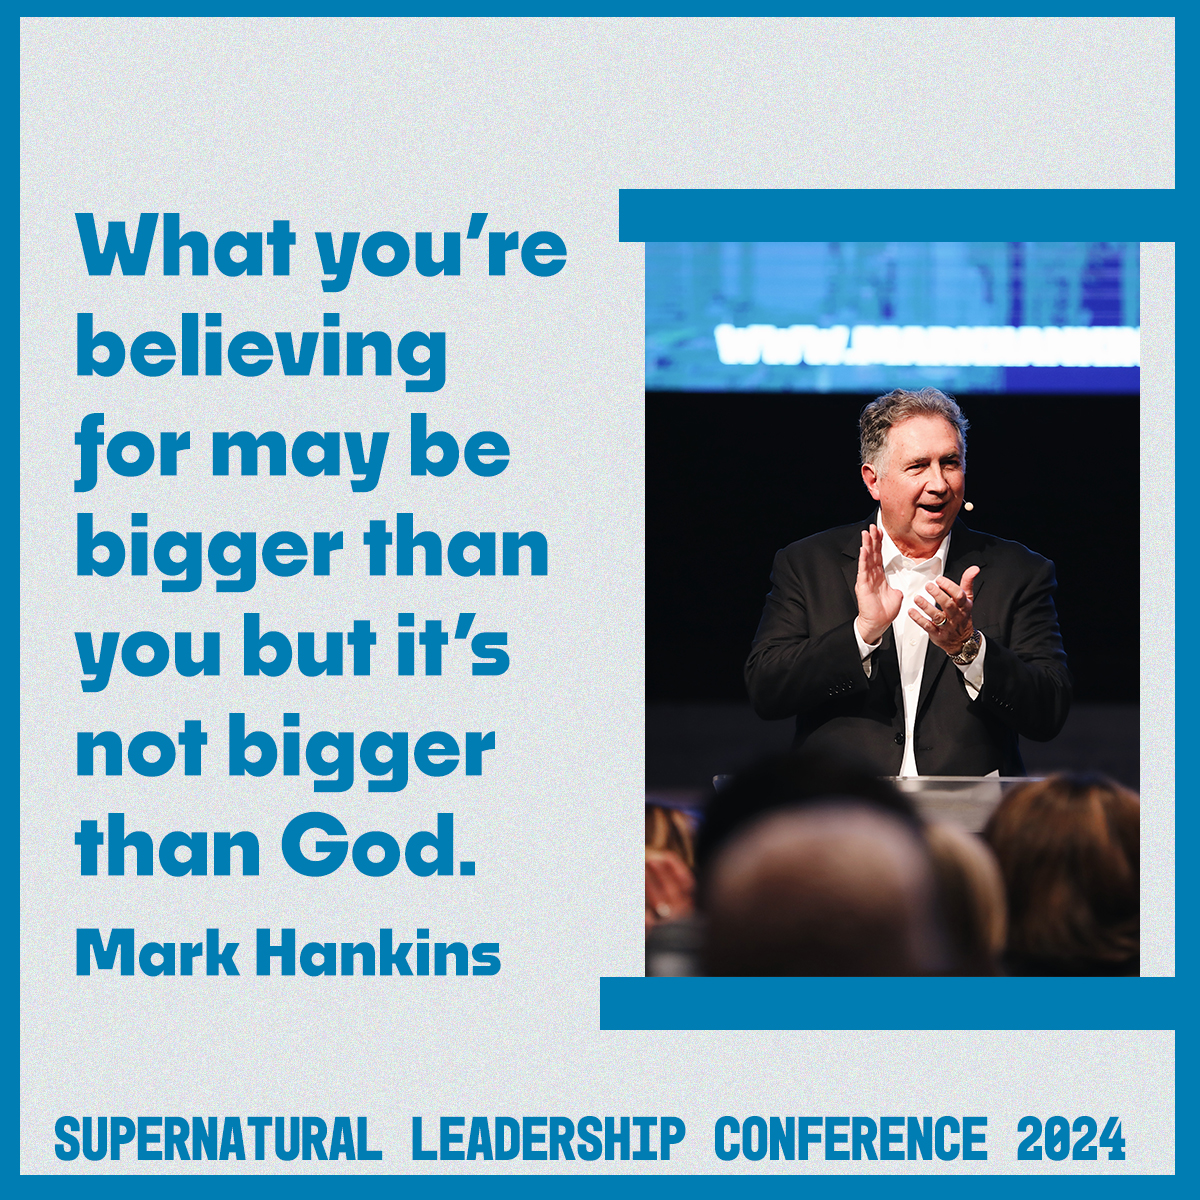 'What you're believing for may be bigger than you but it’s not bigger than God.' #SLC24